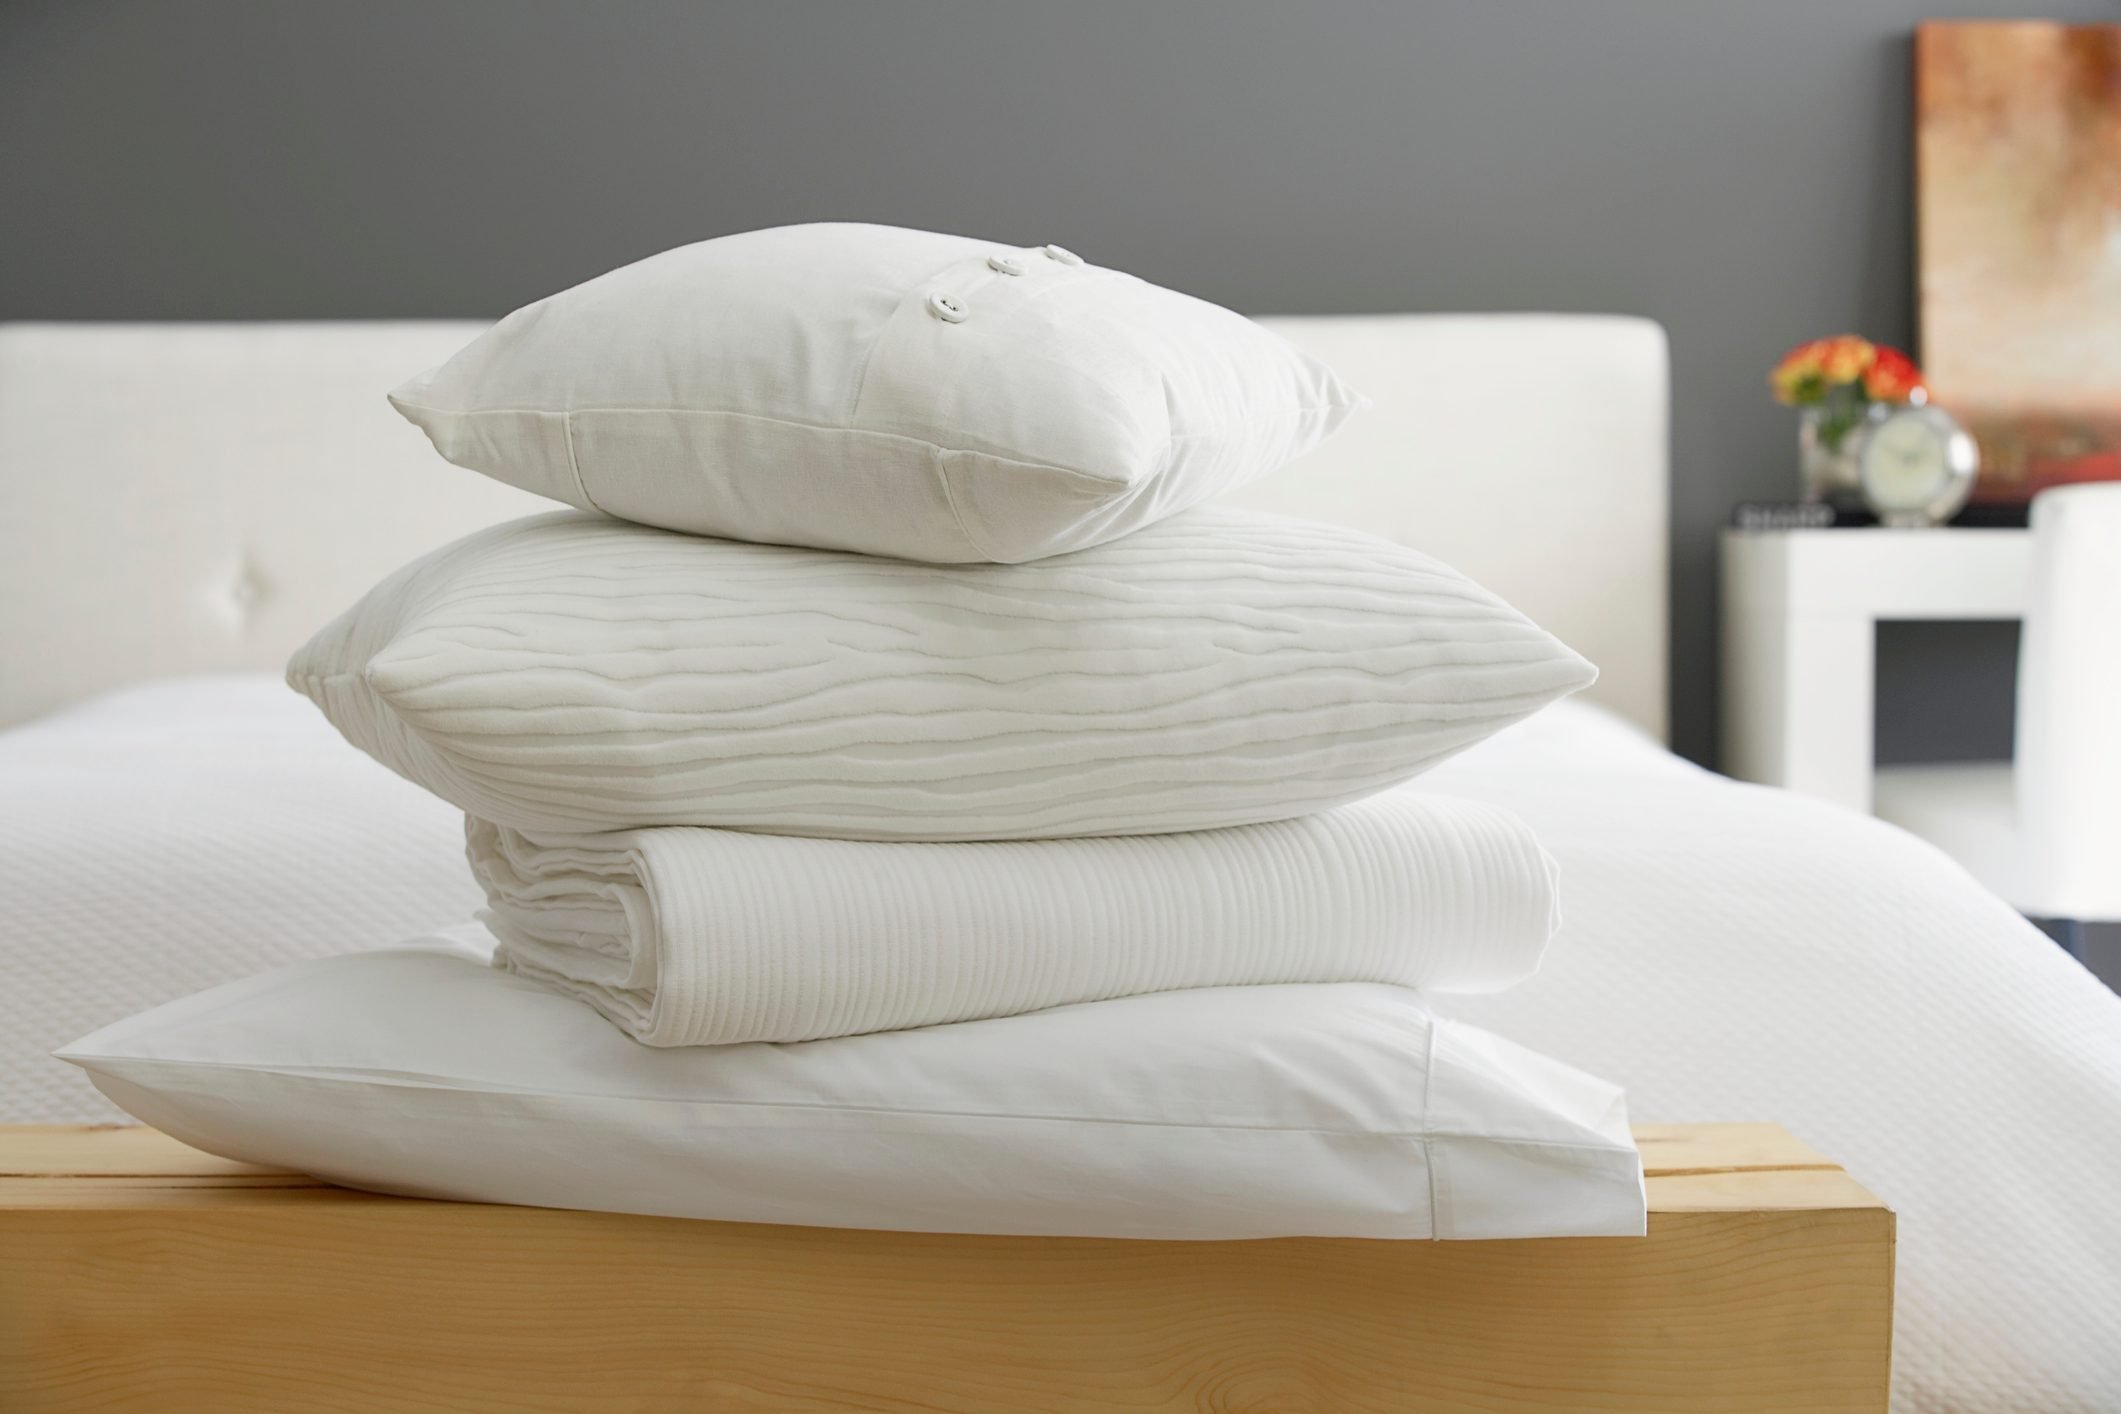 How to Wash Pillows: Your Guide for Every Type of Pillow